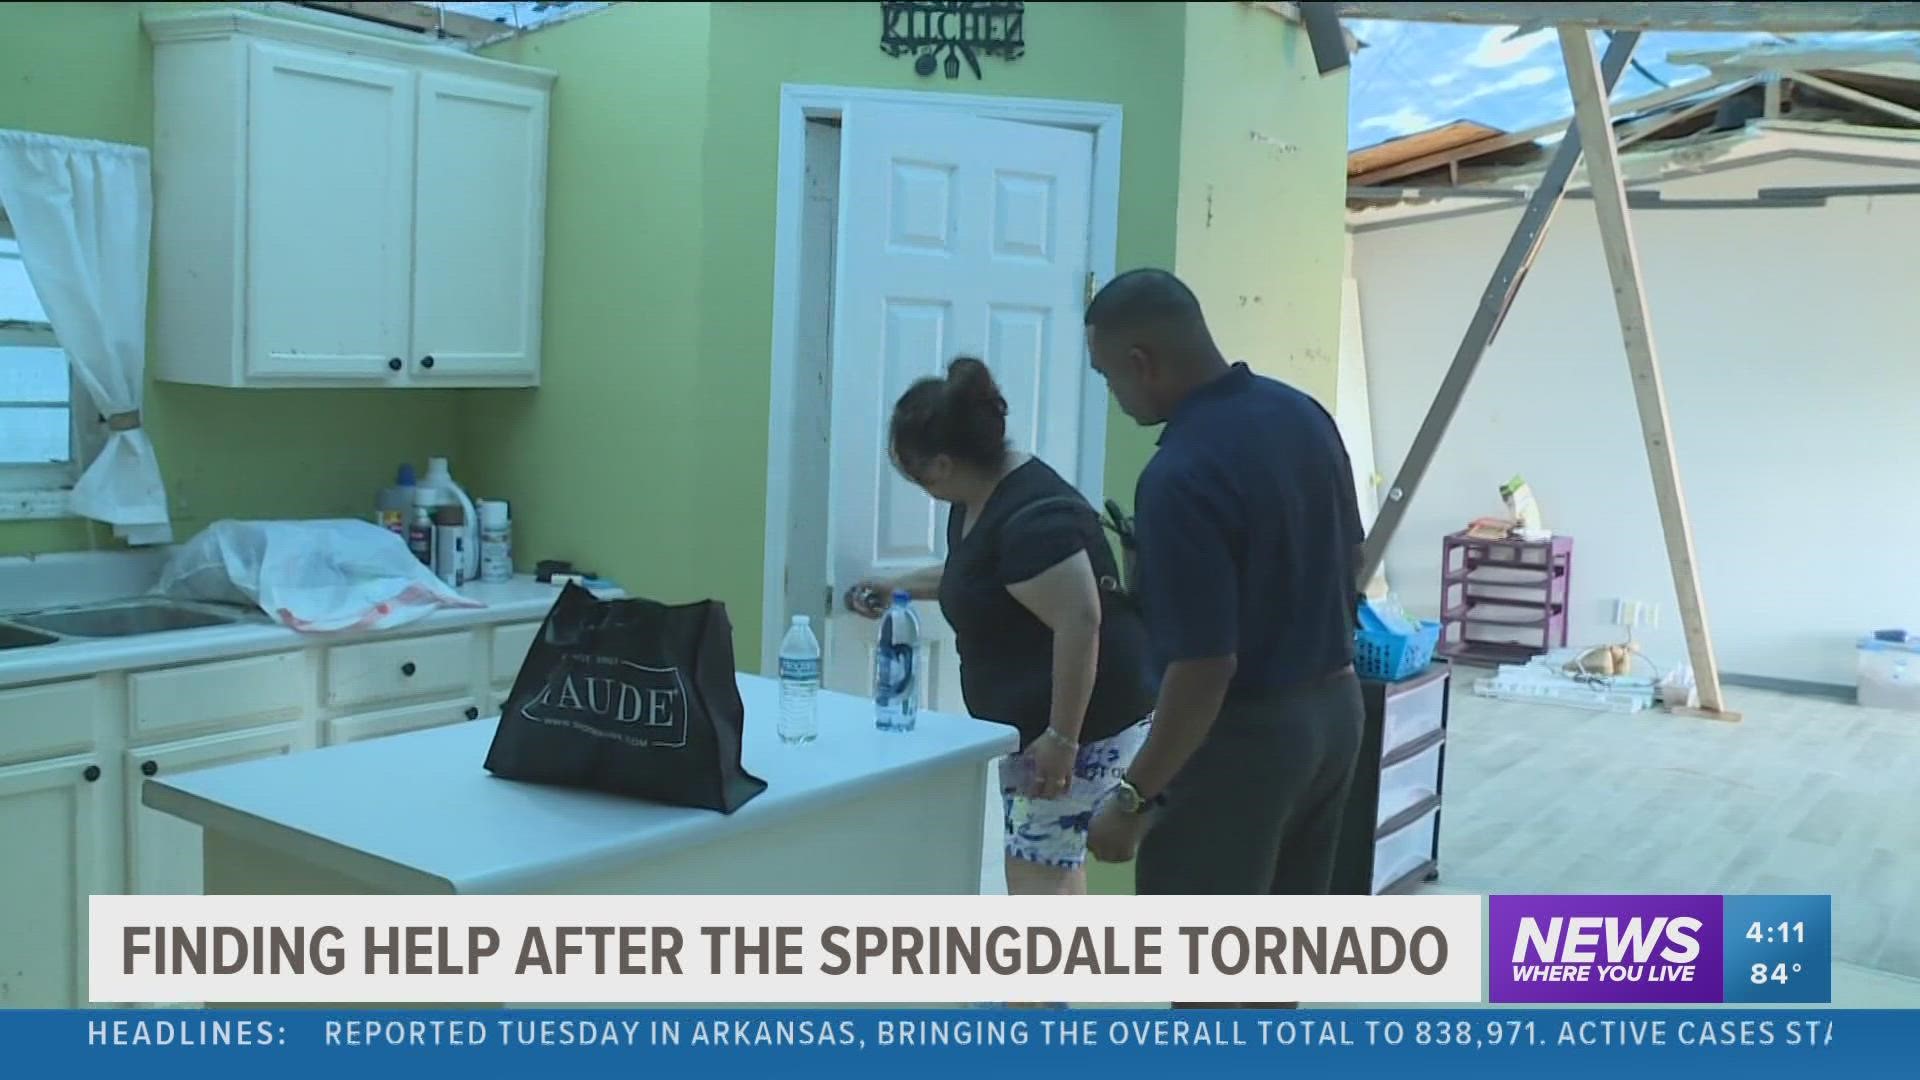 More than a month after an EF-3 tornado ripped through Springdale, some residents are still waiting on funding to help rebuild their homes.